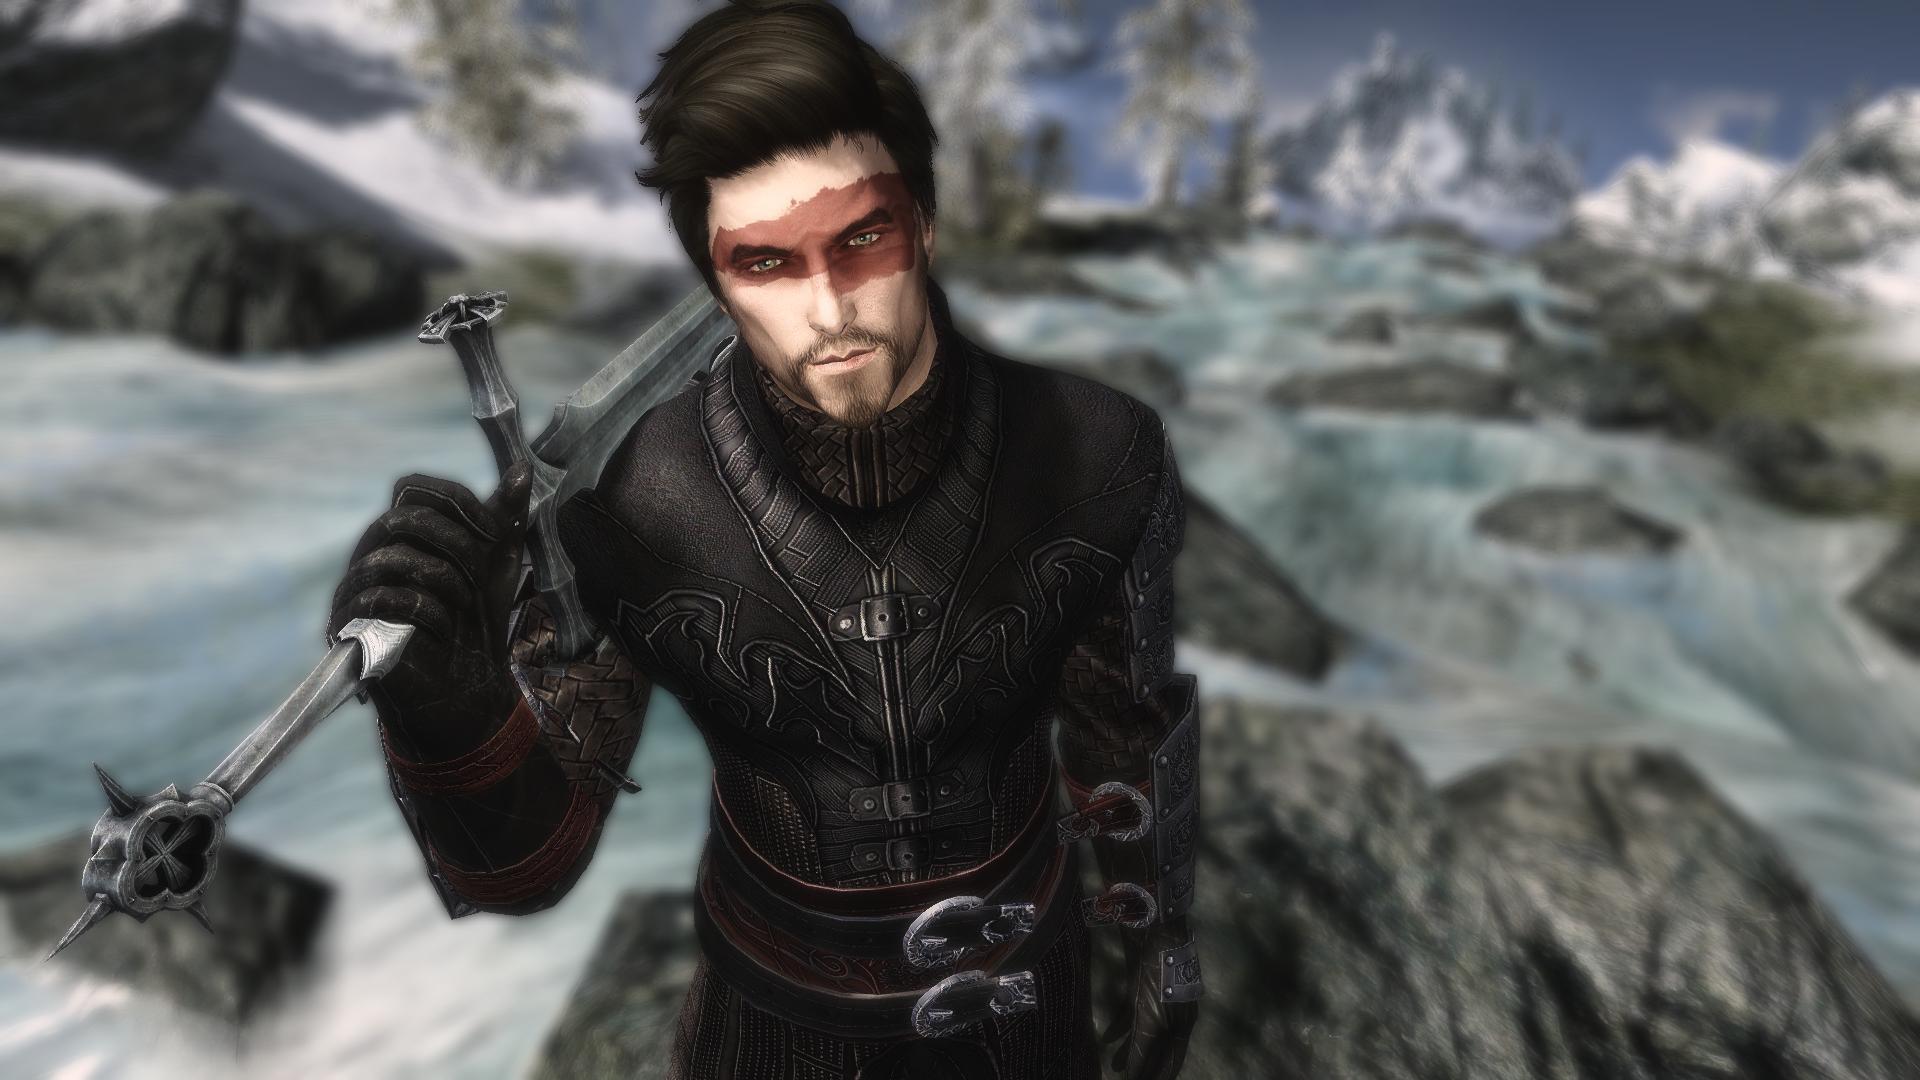 Skyrim Male Character Mods